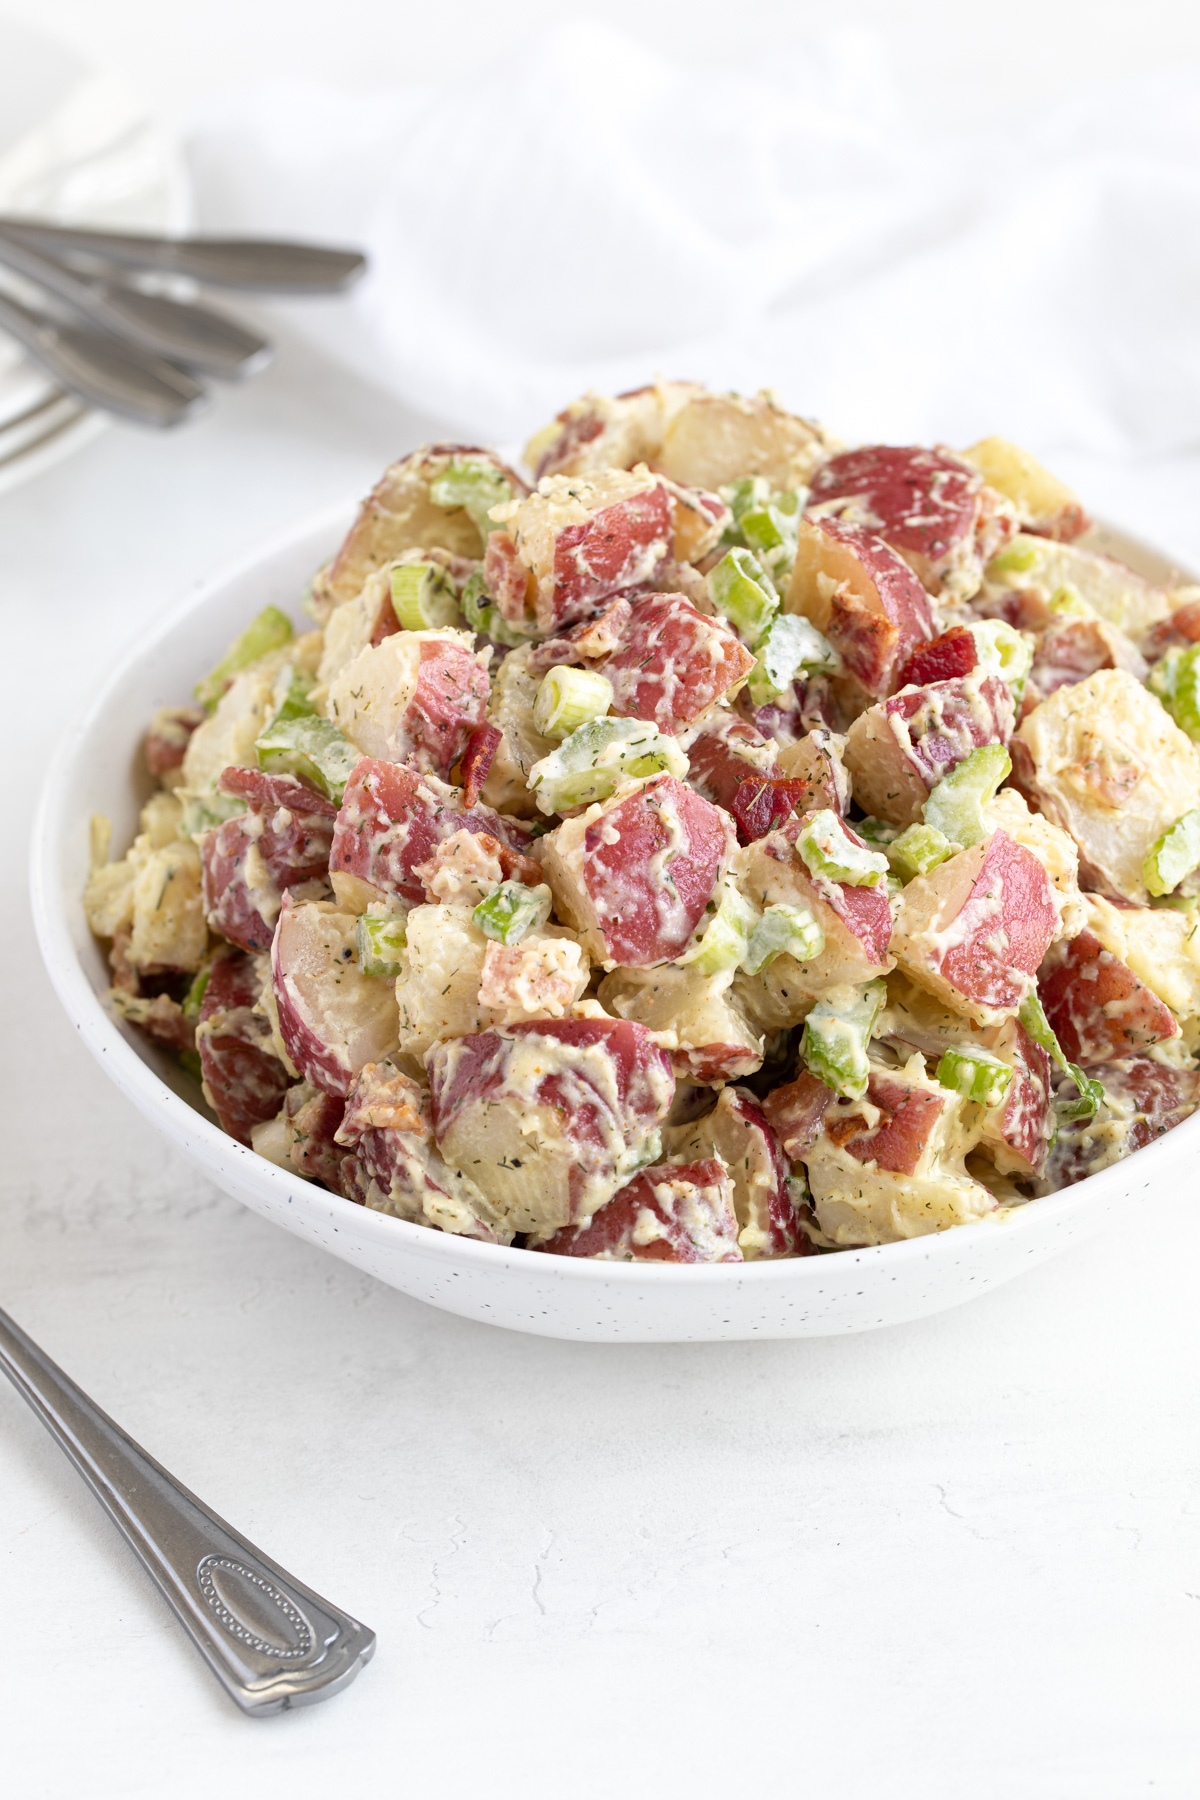 A bowl of red skin potato salad by a serving spoon and a white napkin.